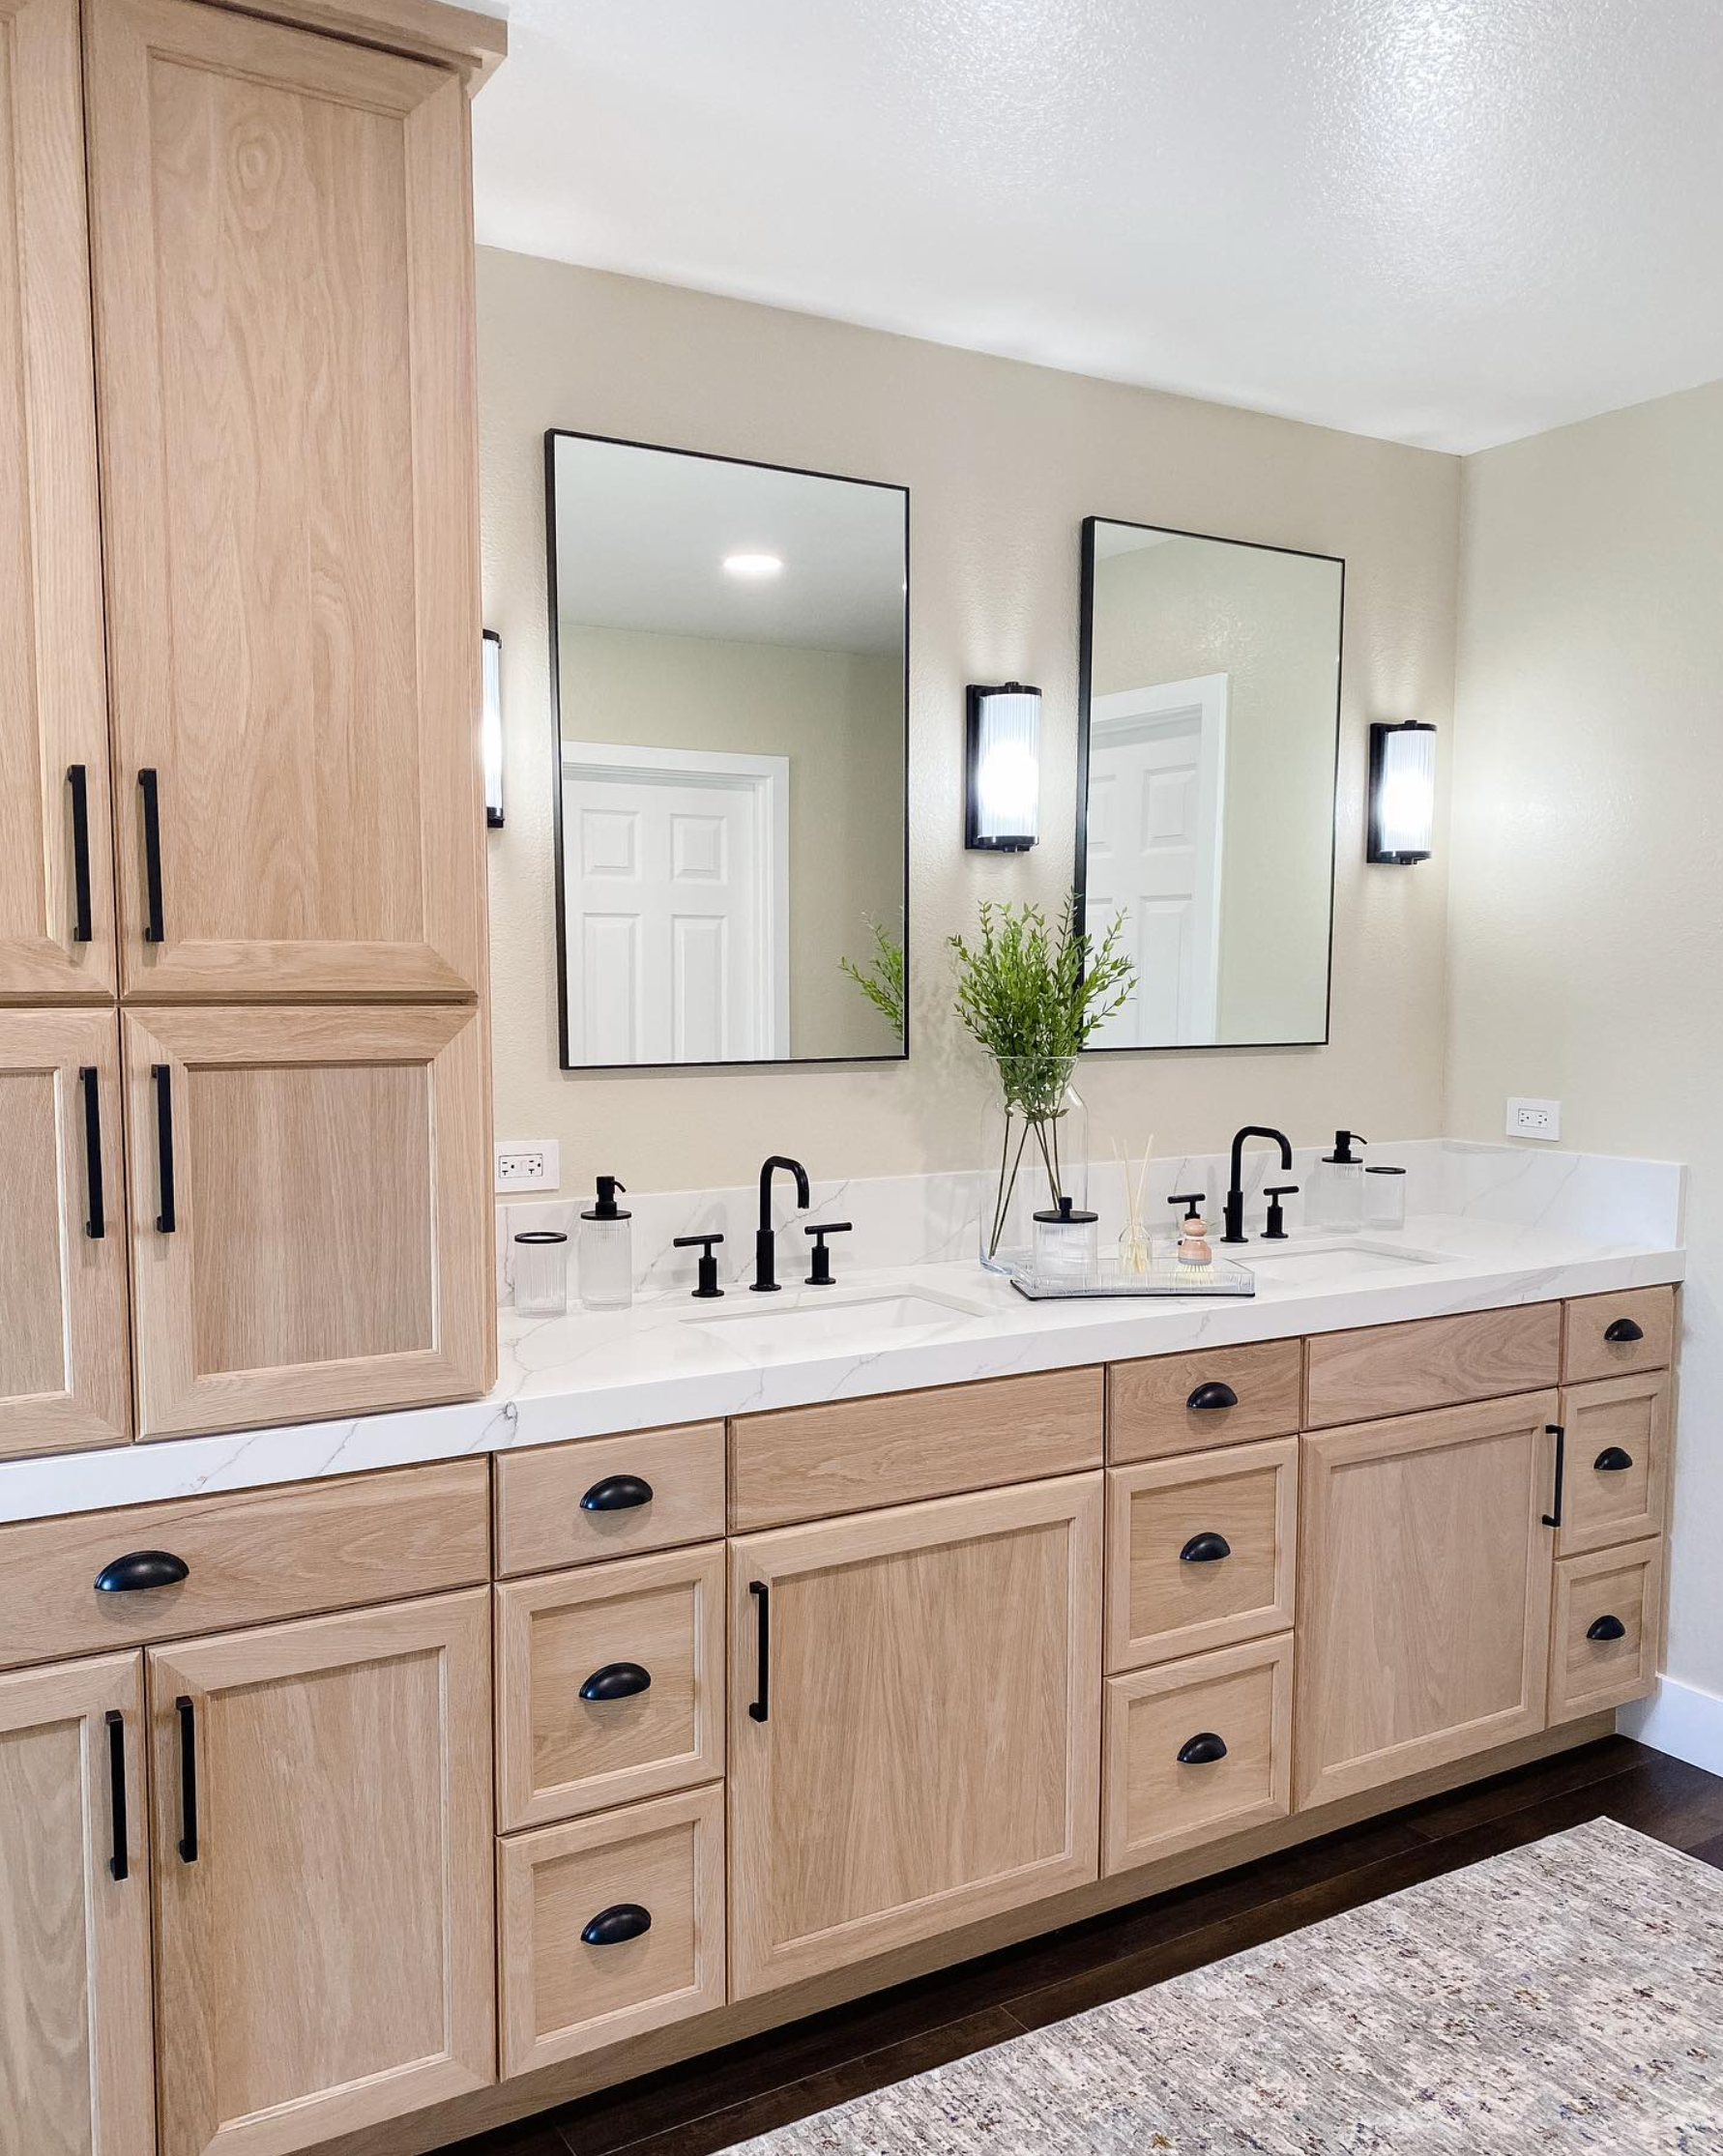 A bathroom with two sinks , two mirrors , and wooden cabinets.